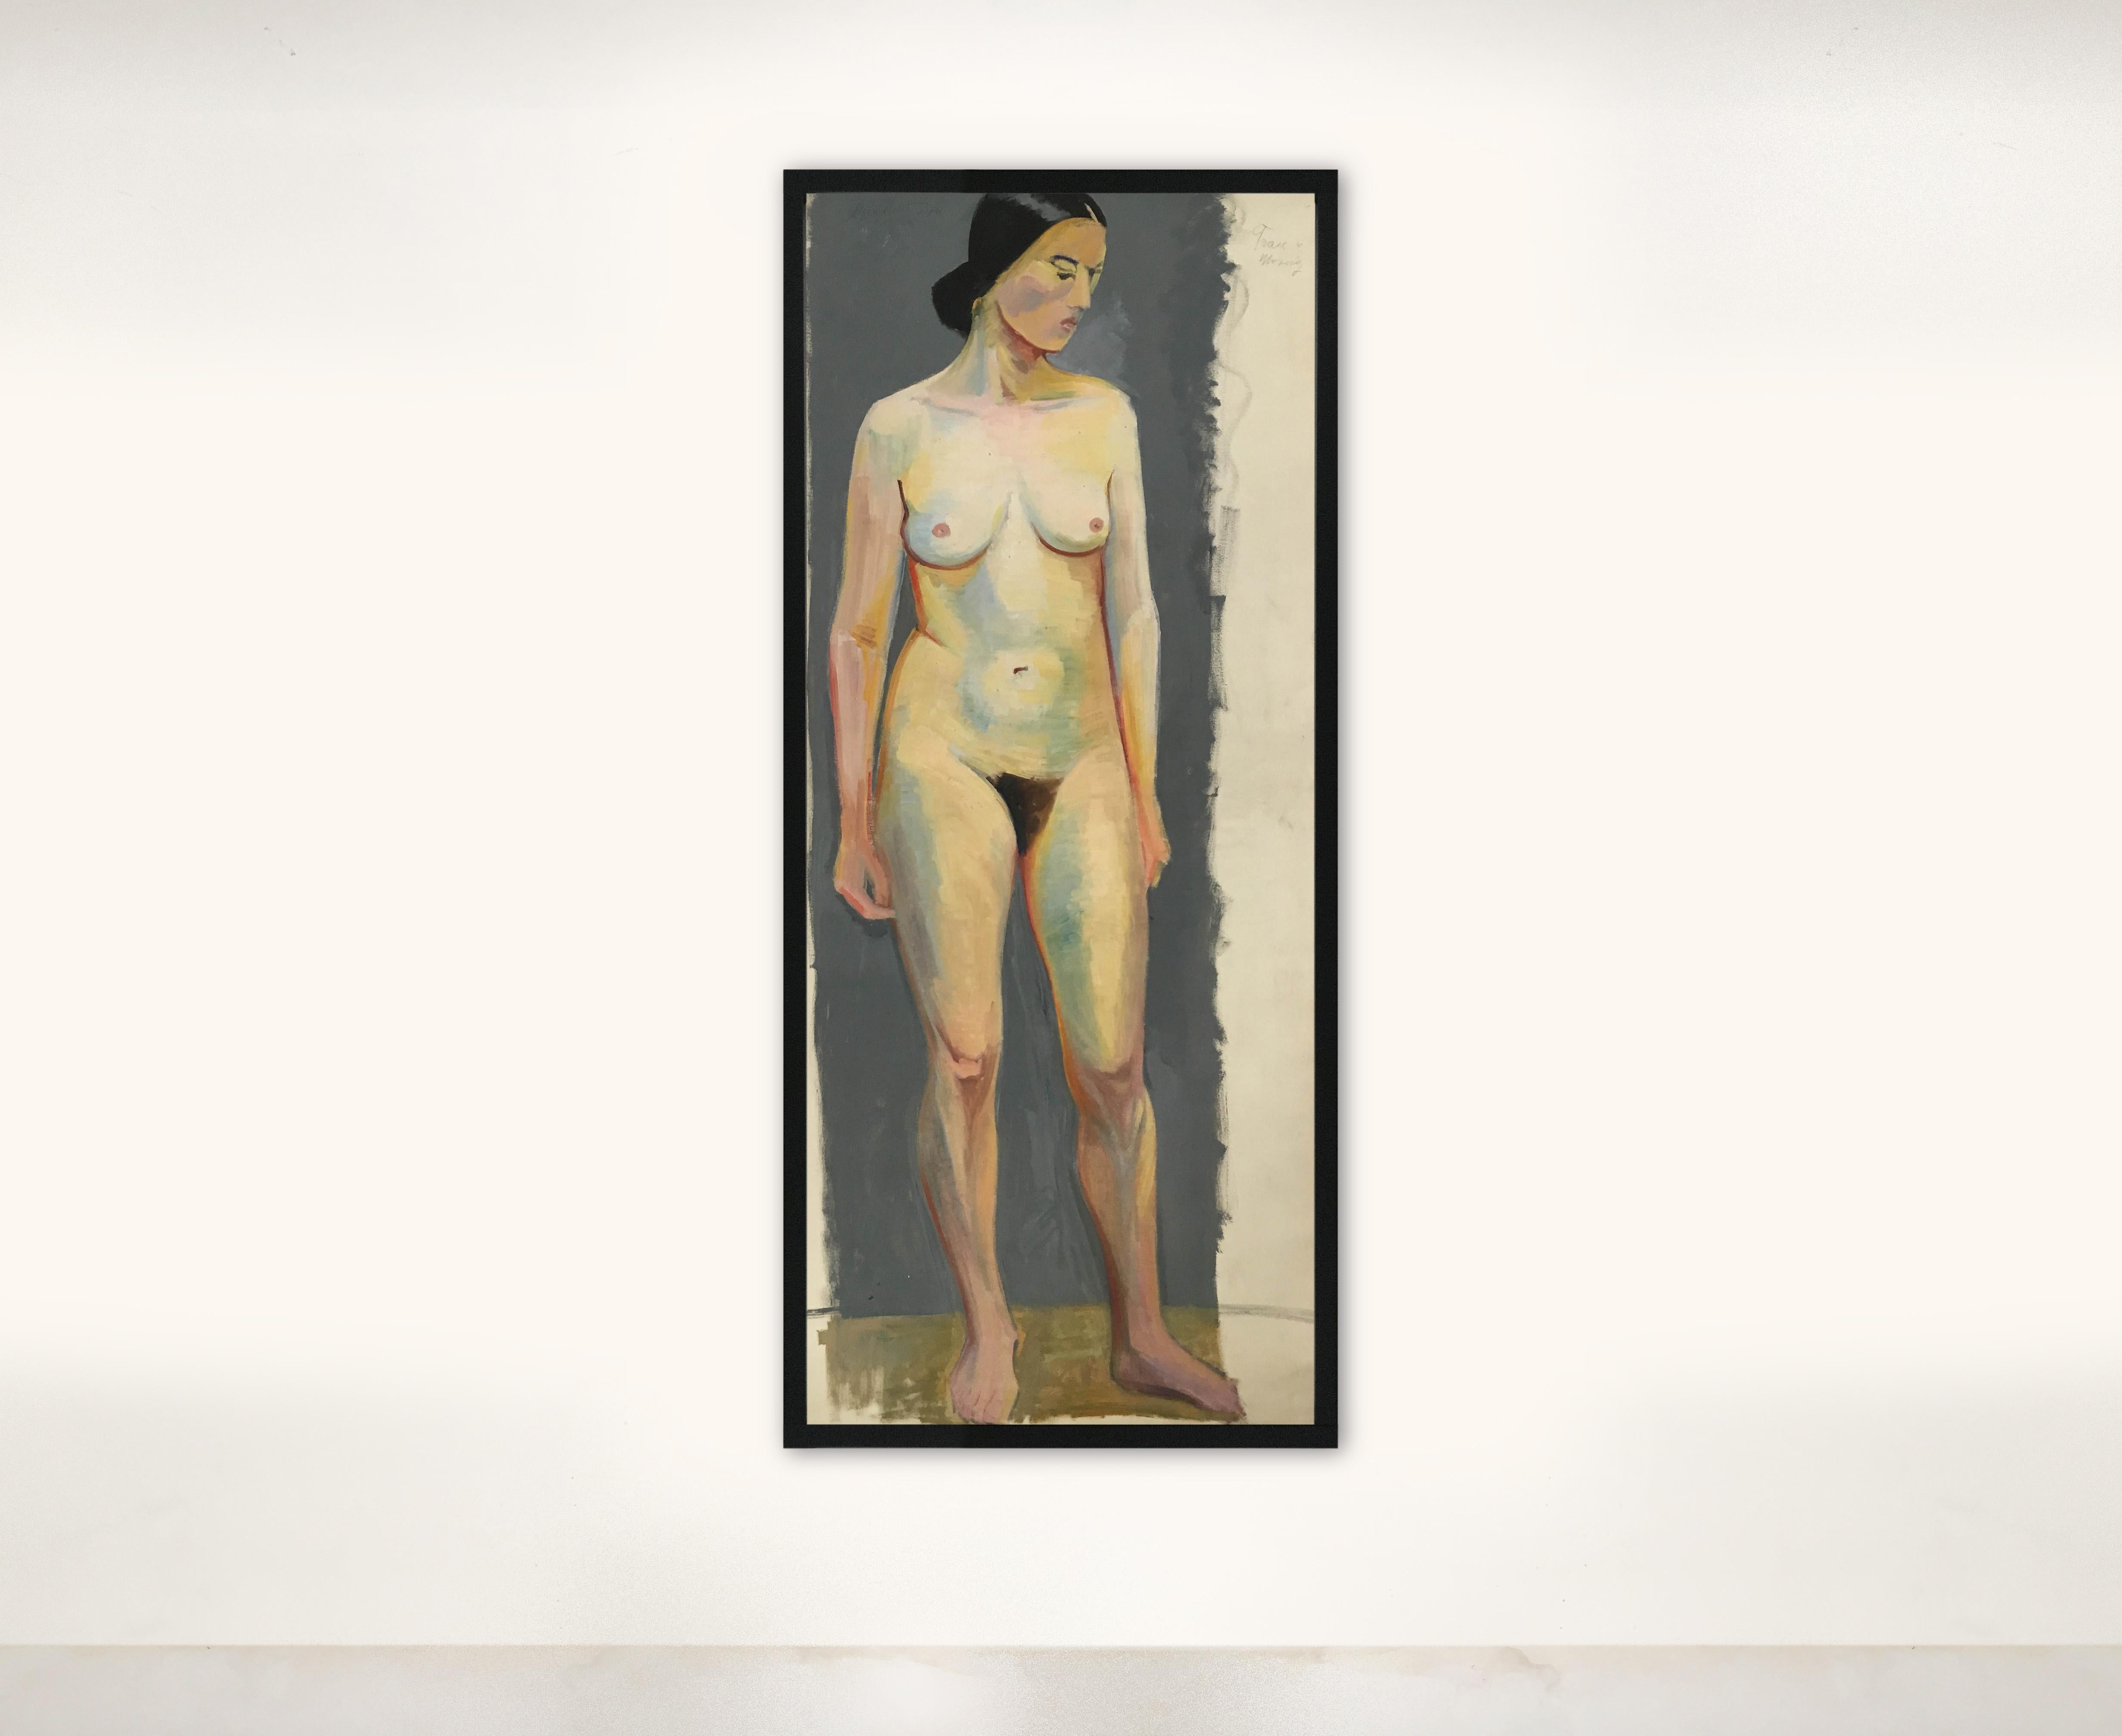 Exquisite 1933 Art Deco female nude portrait oil painting by Austrian artist, Olga von Mossig-Zupan (1900-1992). The oil painting is on unstretched canvas and depicts the study of an nude female signed and dated by the artist, Olga Mossig Zupan